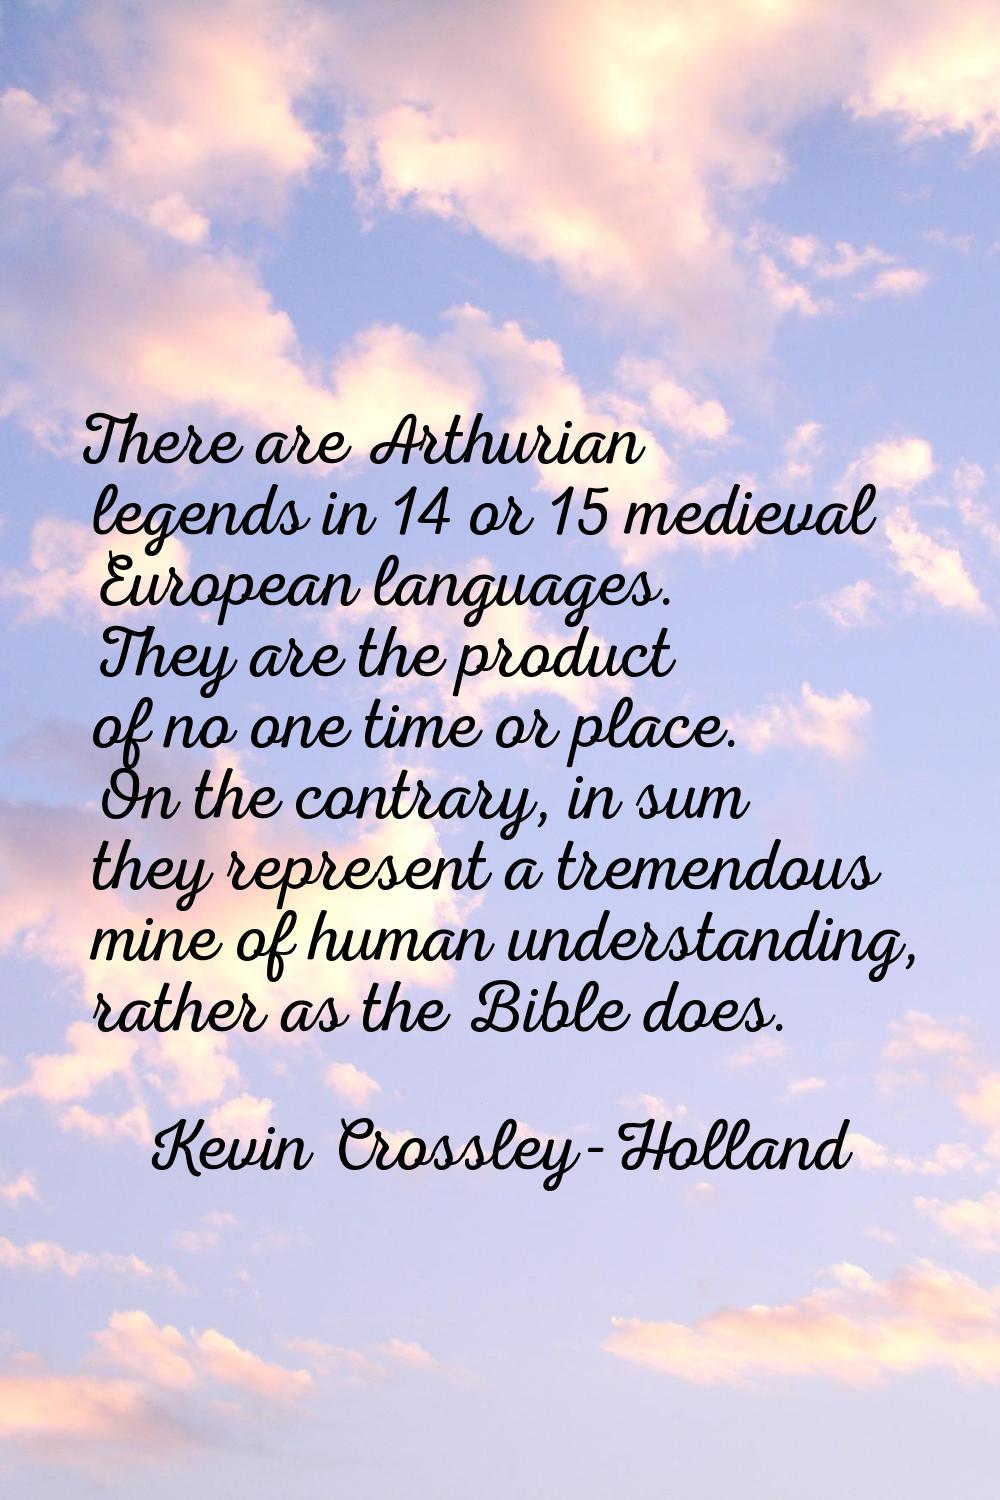 There are Arthurian legends in 14 or 15 medieval European languages. They are the product of no one